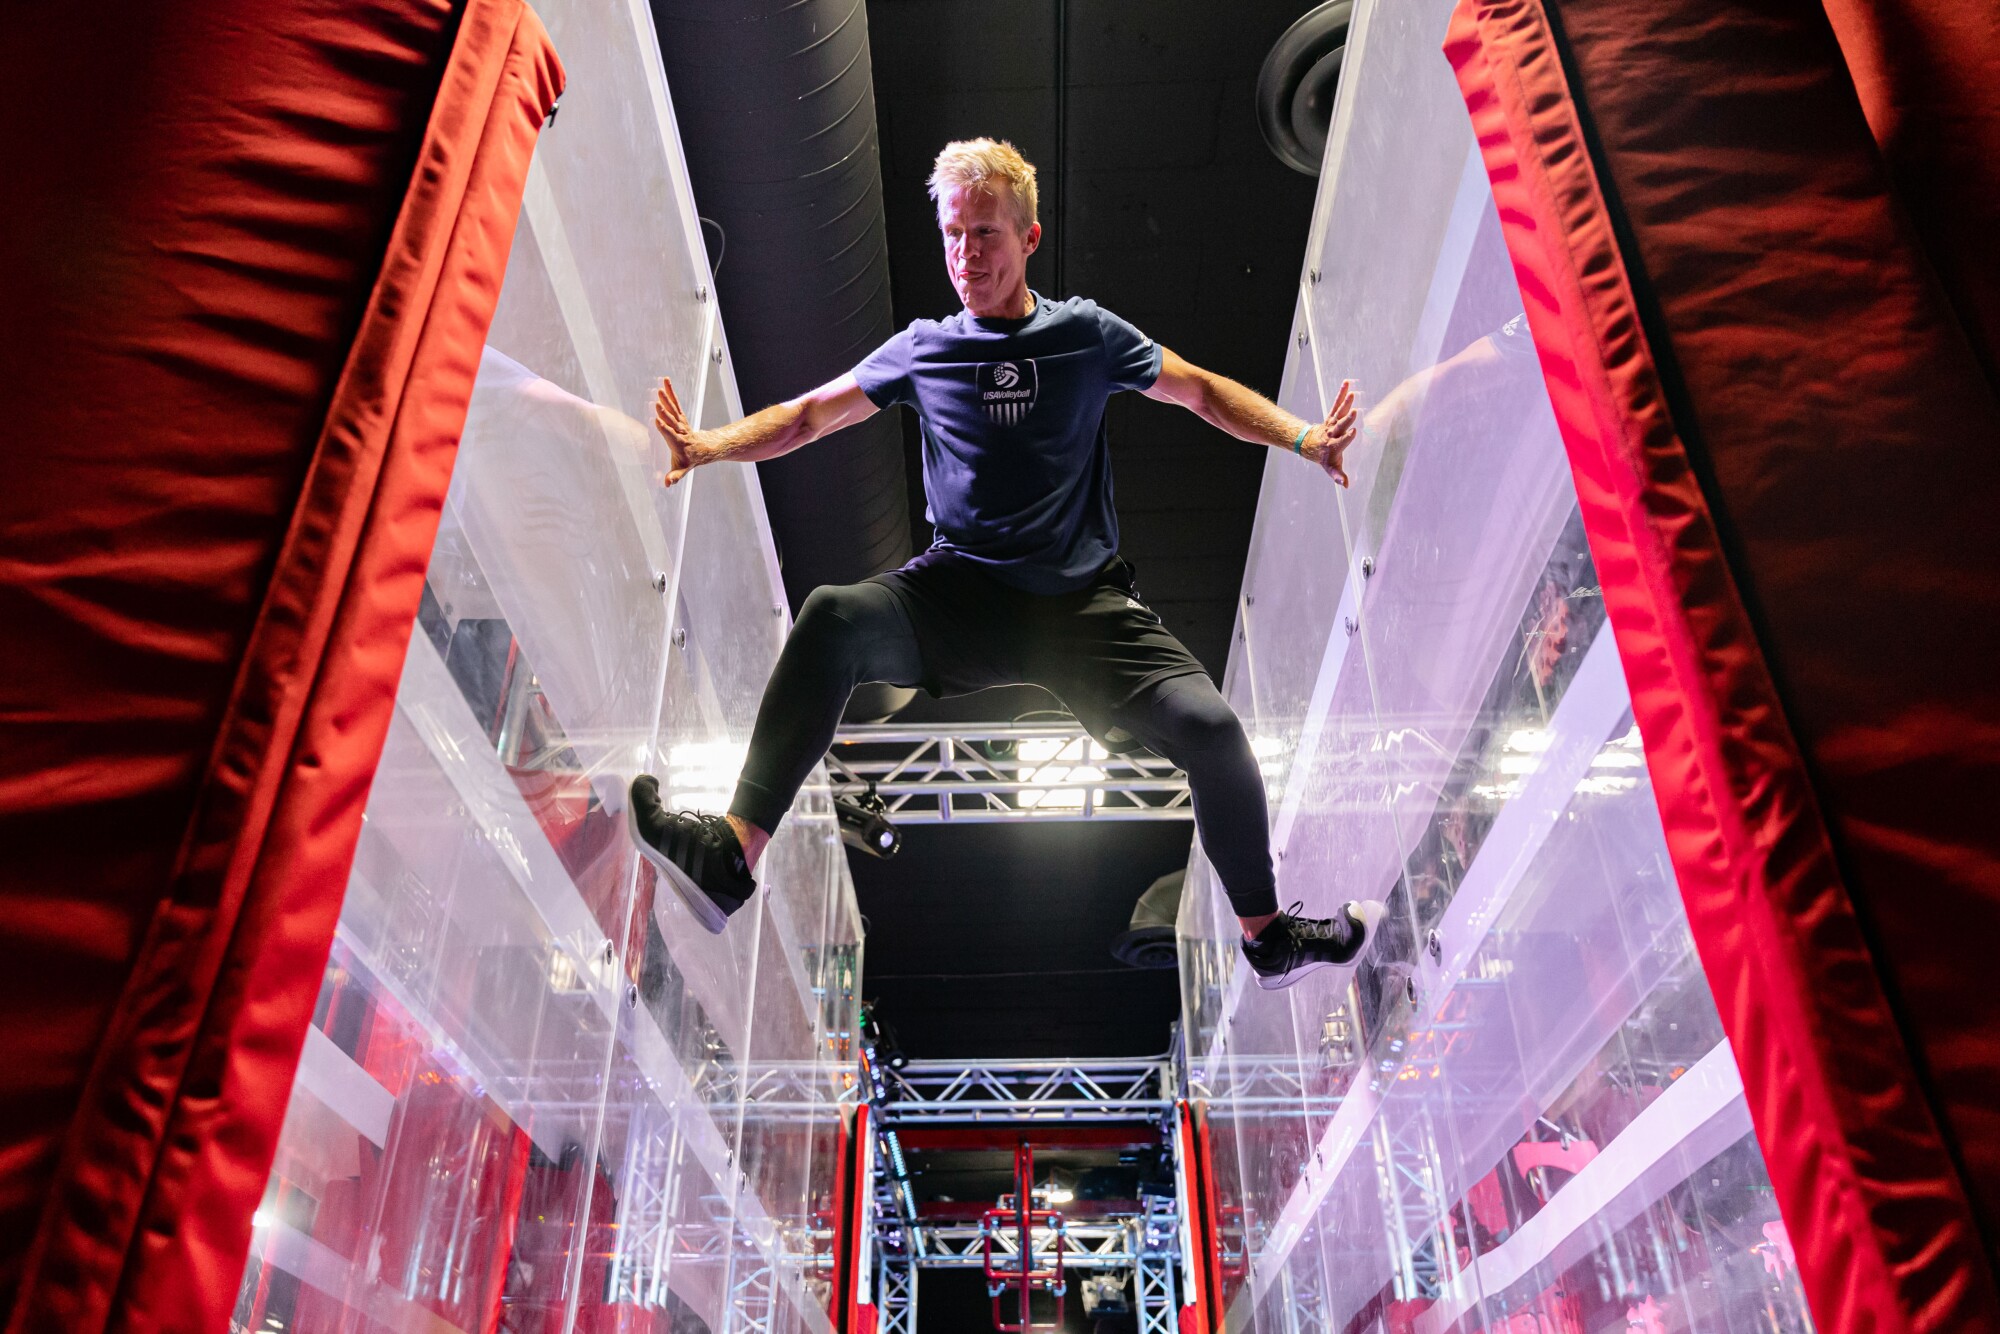 A man balances between two vertical walls at an obstacle course.